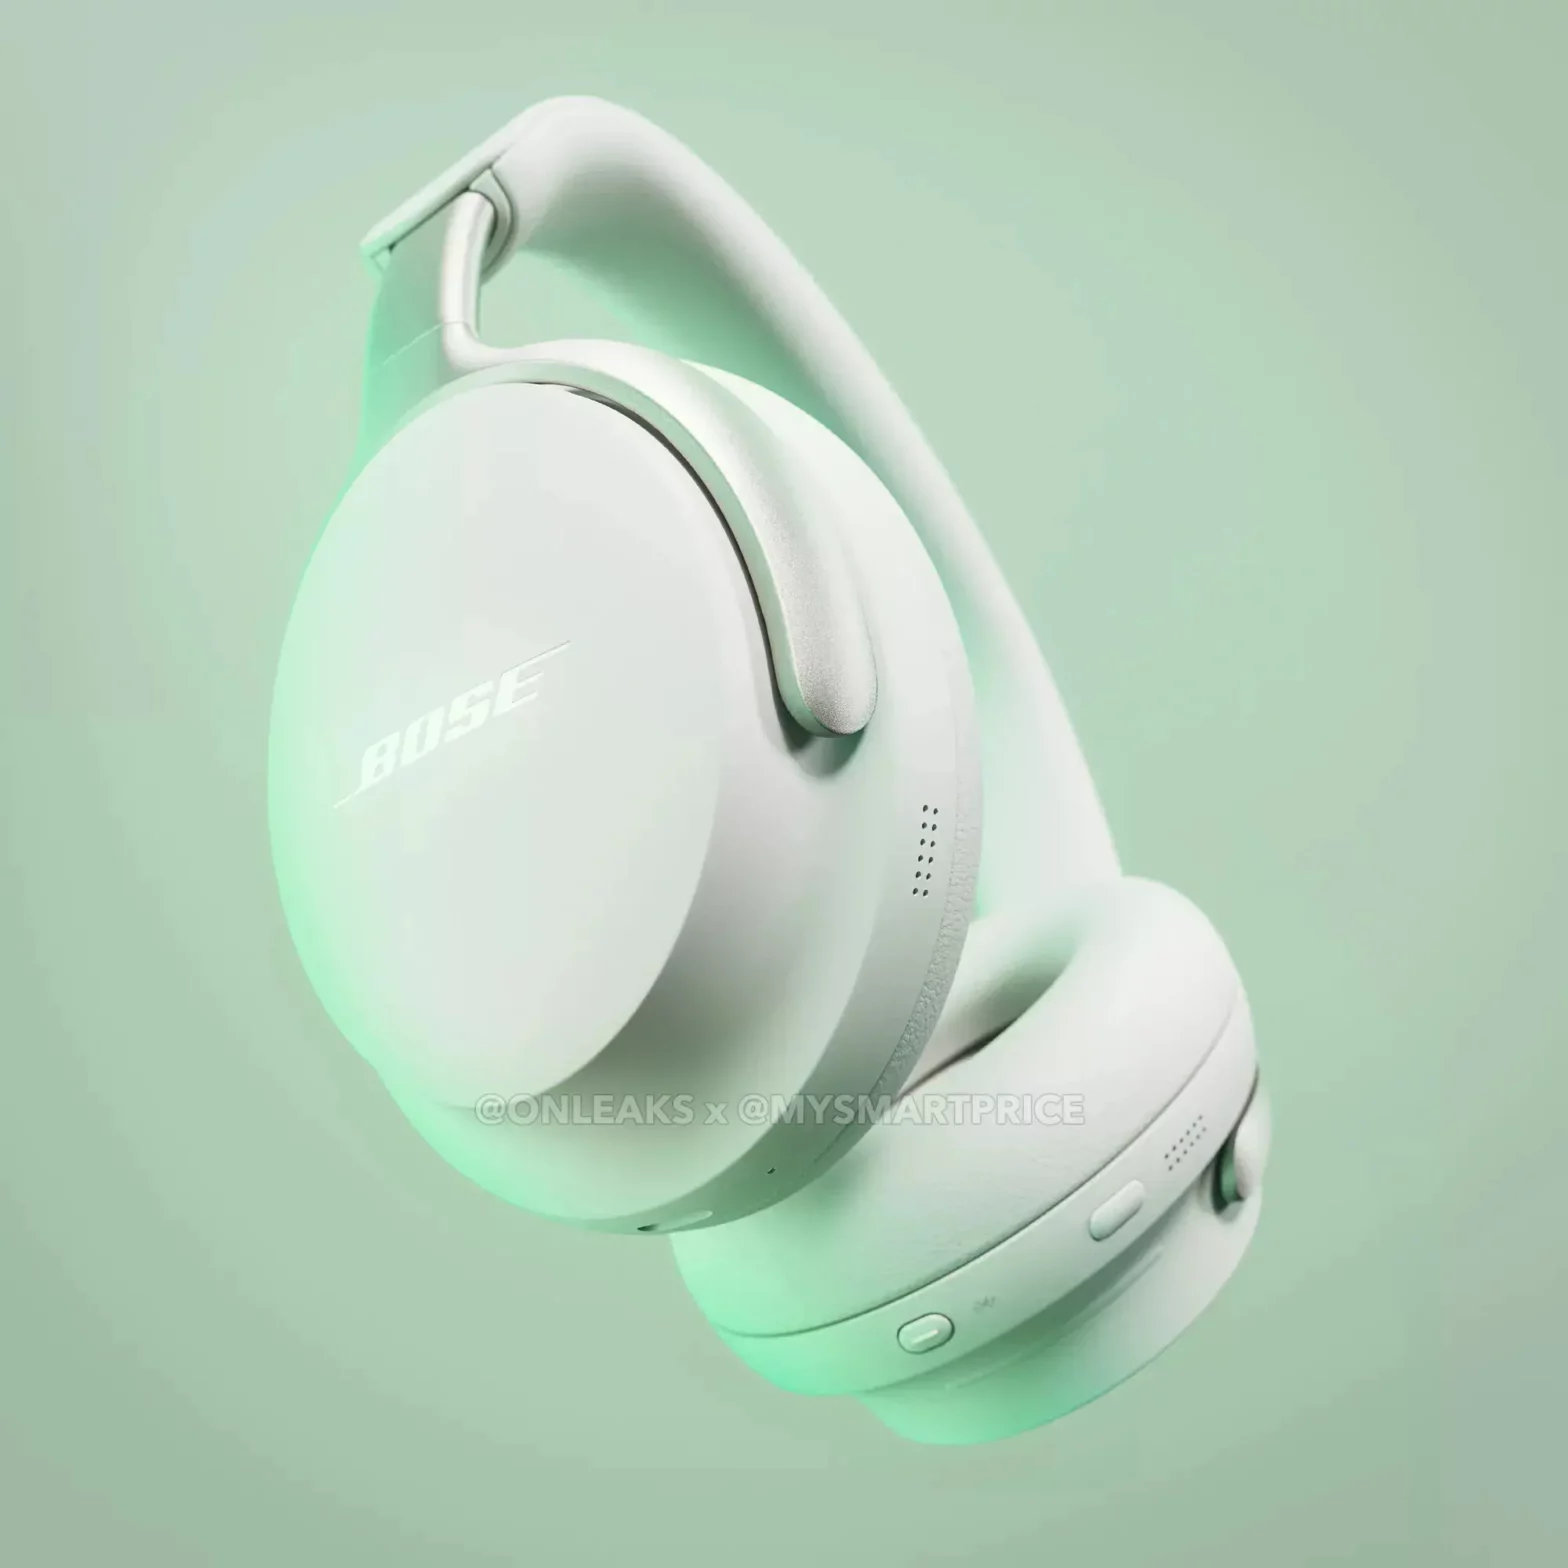 Feast your eyes on the new Bose QuietComfort Ultra headphones